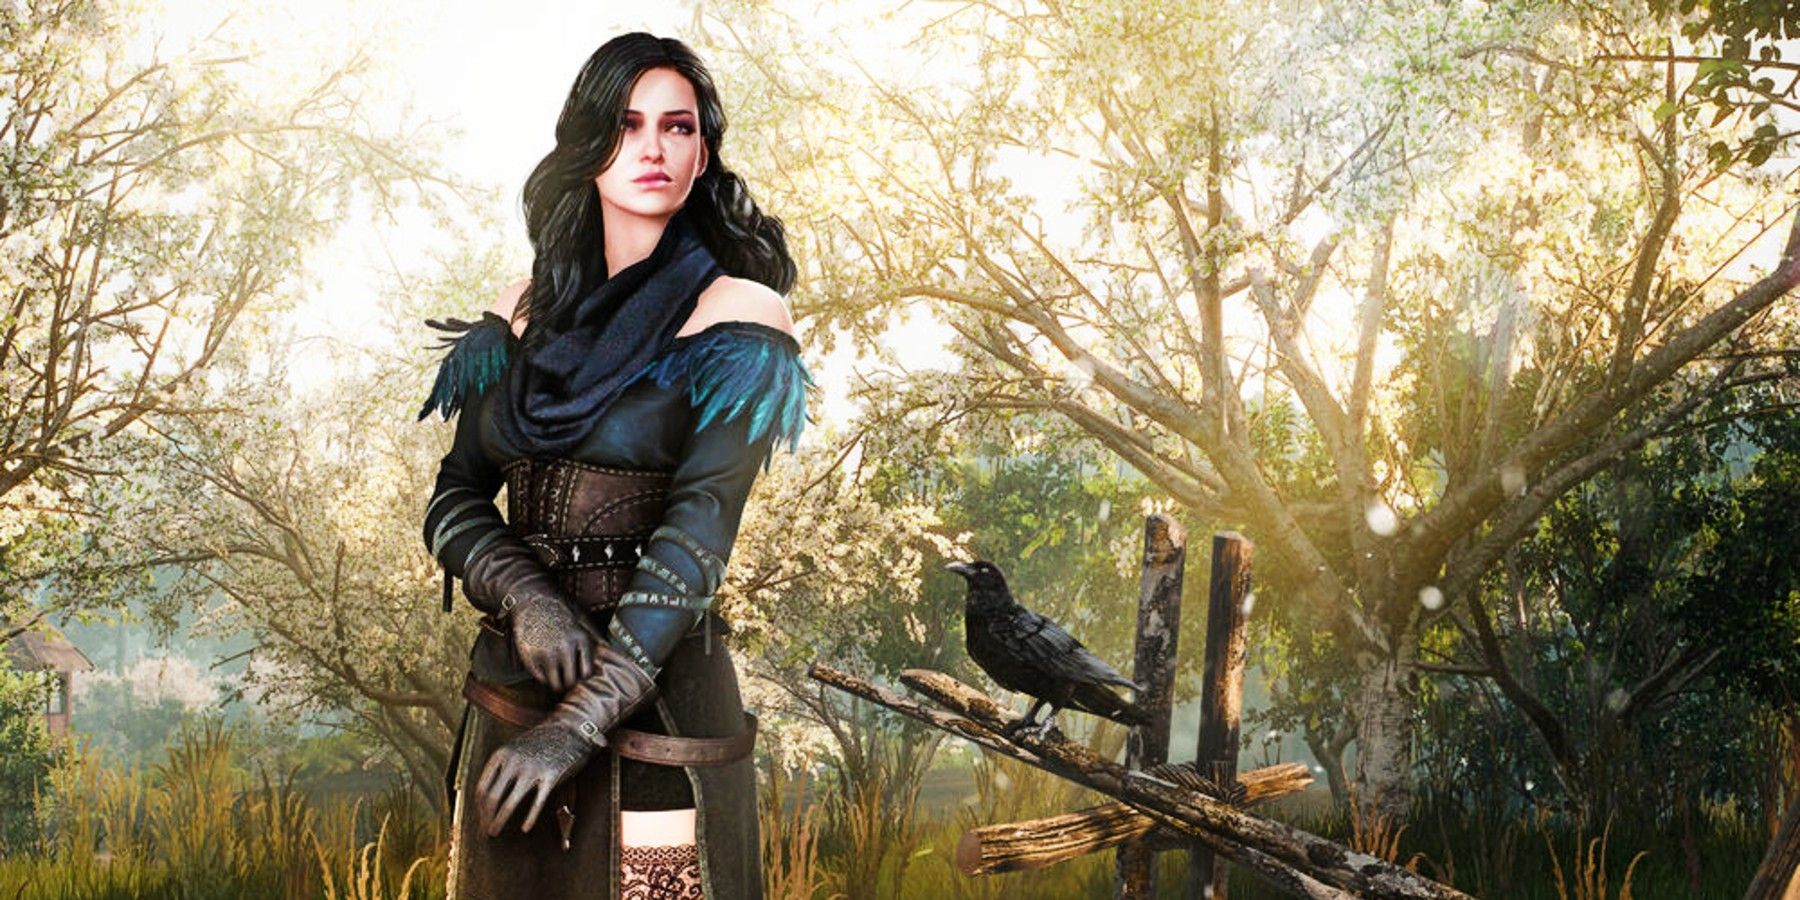 yennefer in her alternate outfit